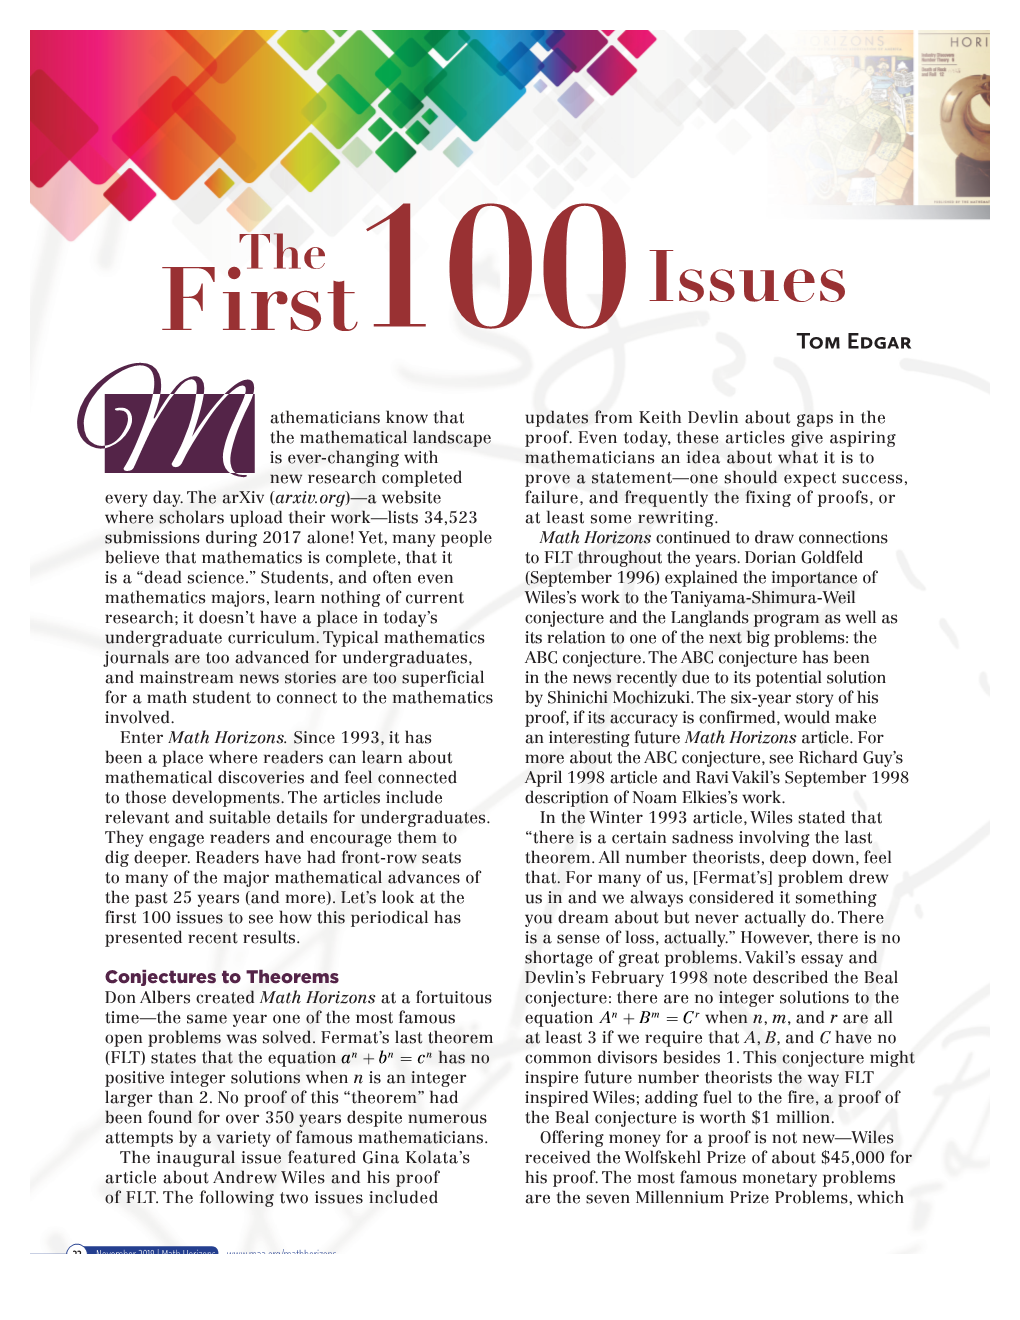 The First 100 Issues